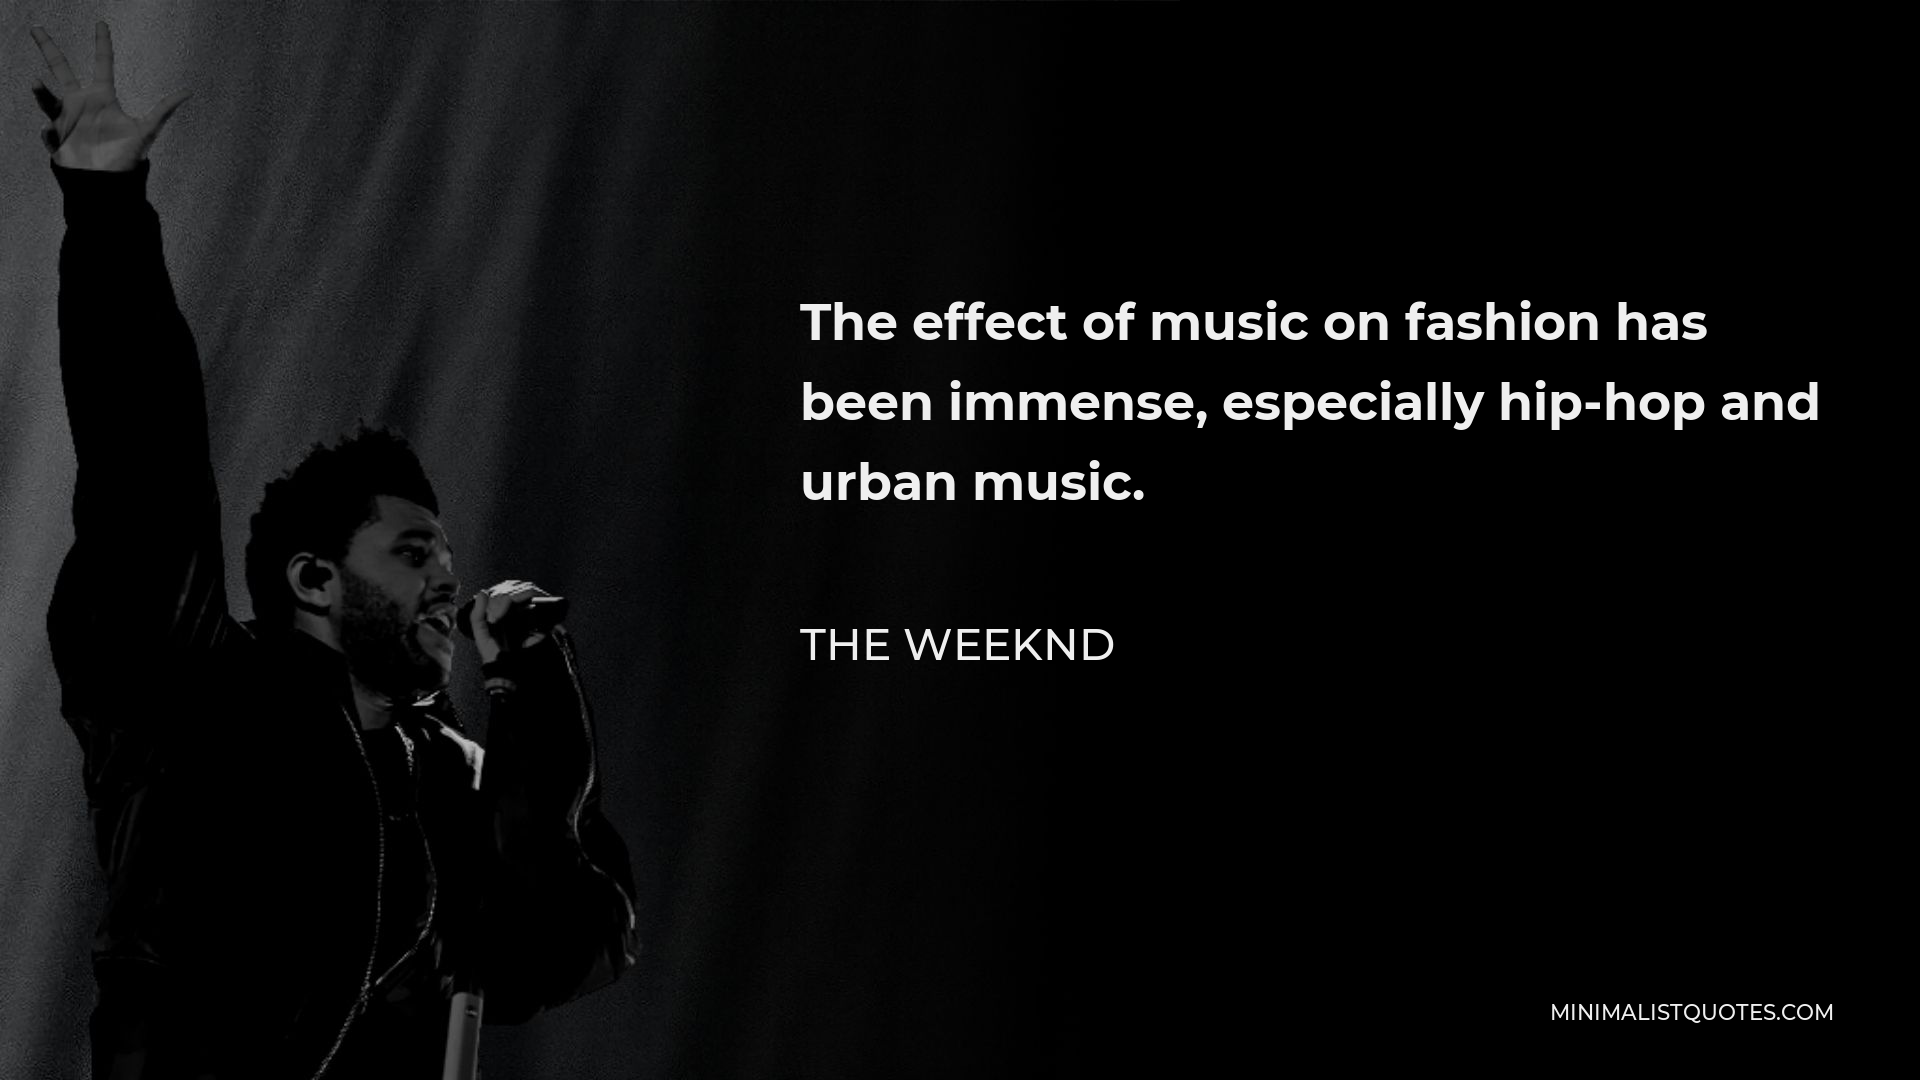 The Weeknd Quote - The effect of music on fashion has been immense, especially hip-hop and urban music.